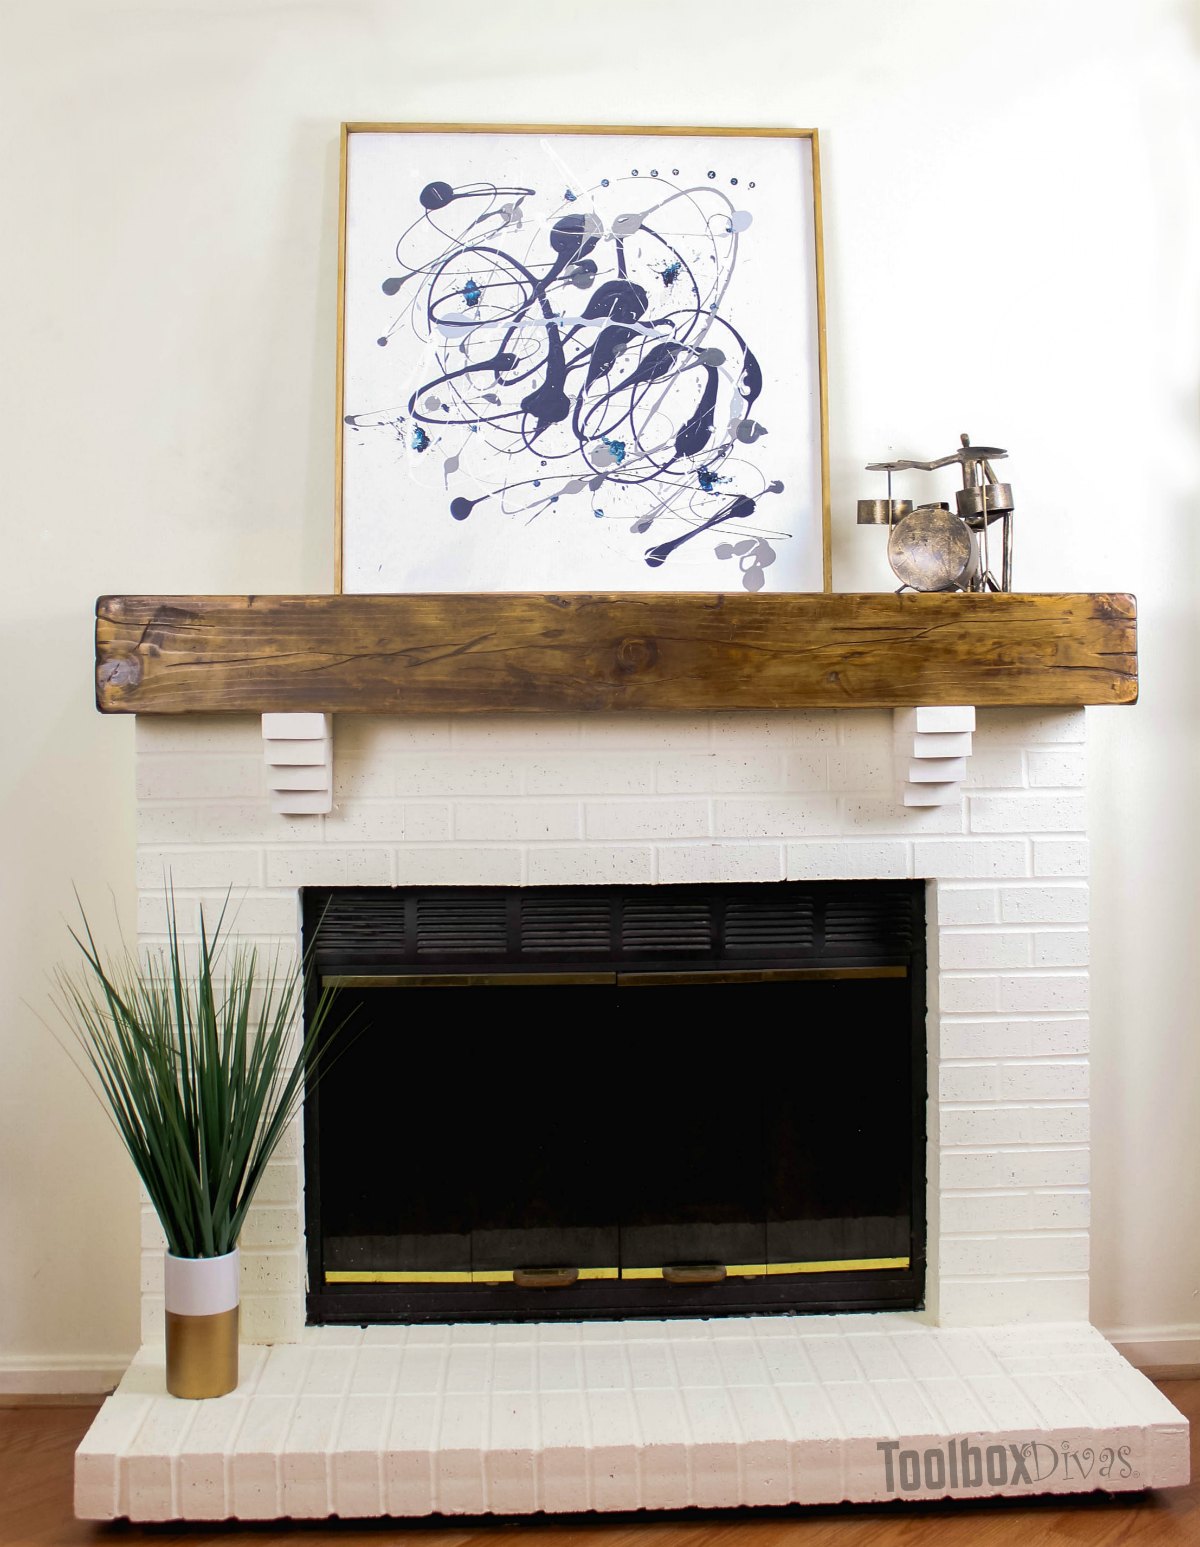 How To Build A Rustic Faux Beam Mantel, Simple Fireplace Mantel Plans